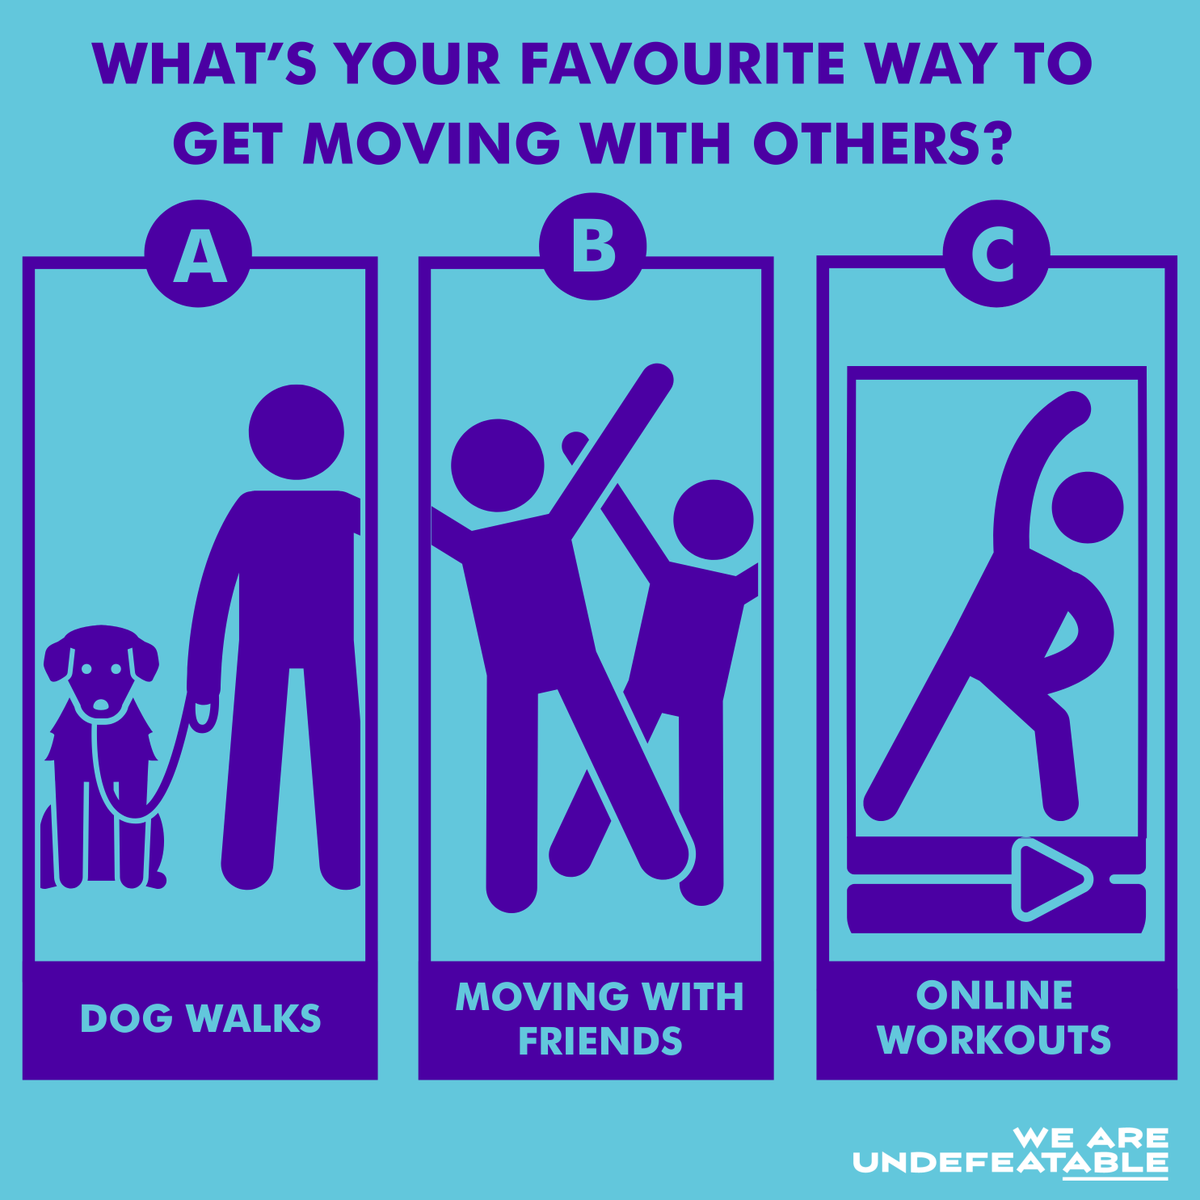 Mixing up who we get moving with can be a great motivator to get active 🙌 Whether it's taking your pet for a walk, buddying up with friends, or hopping on an online workout, there are many ways to mix up your routine! How do you like to get active with others? 👇